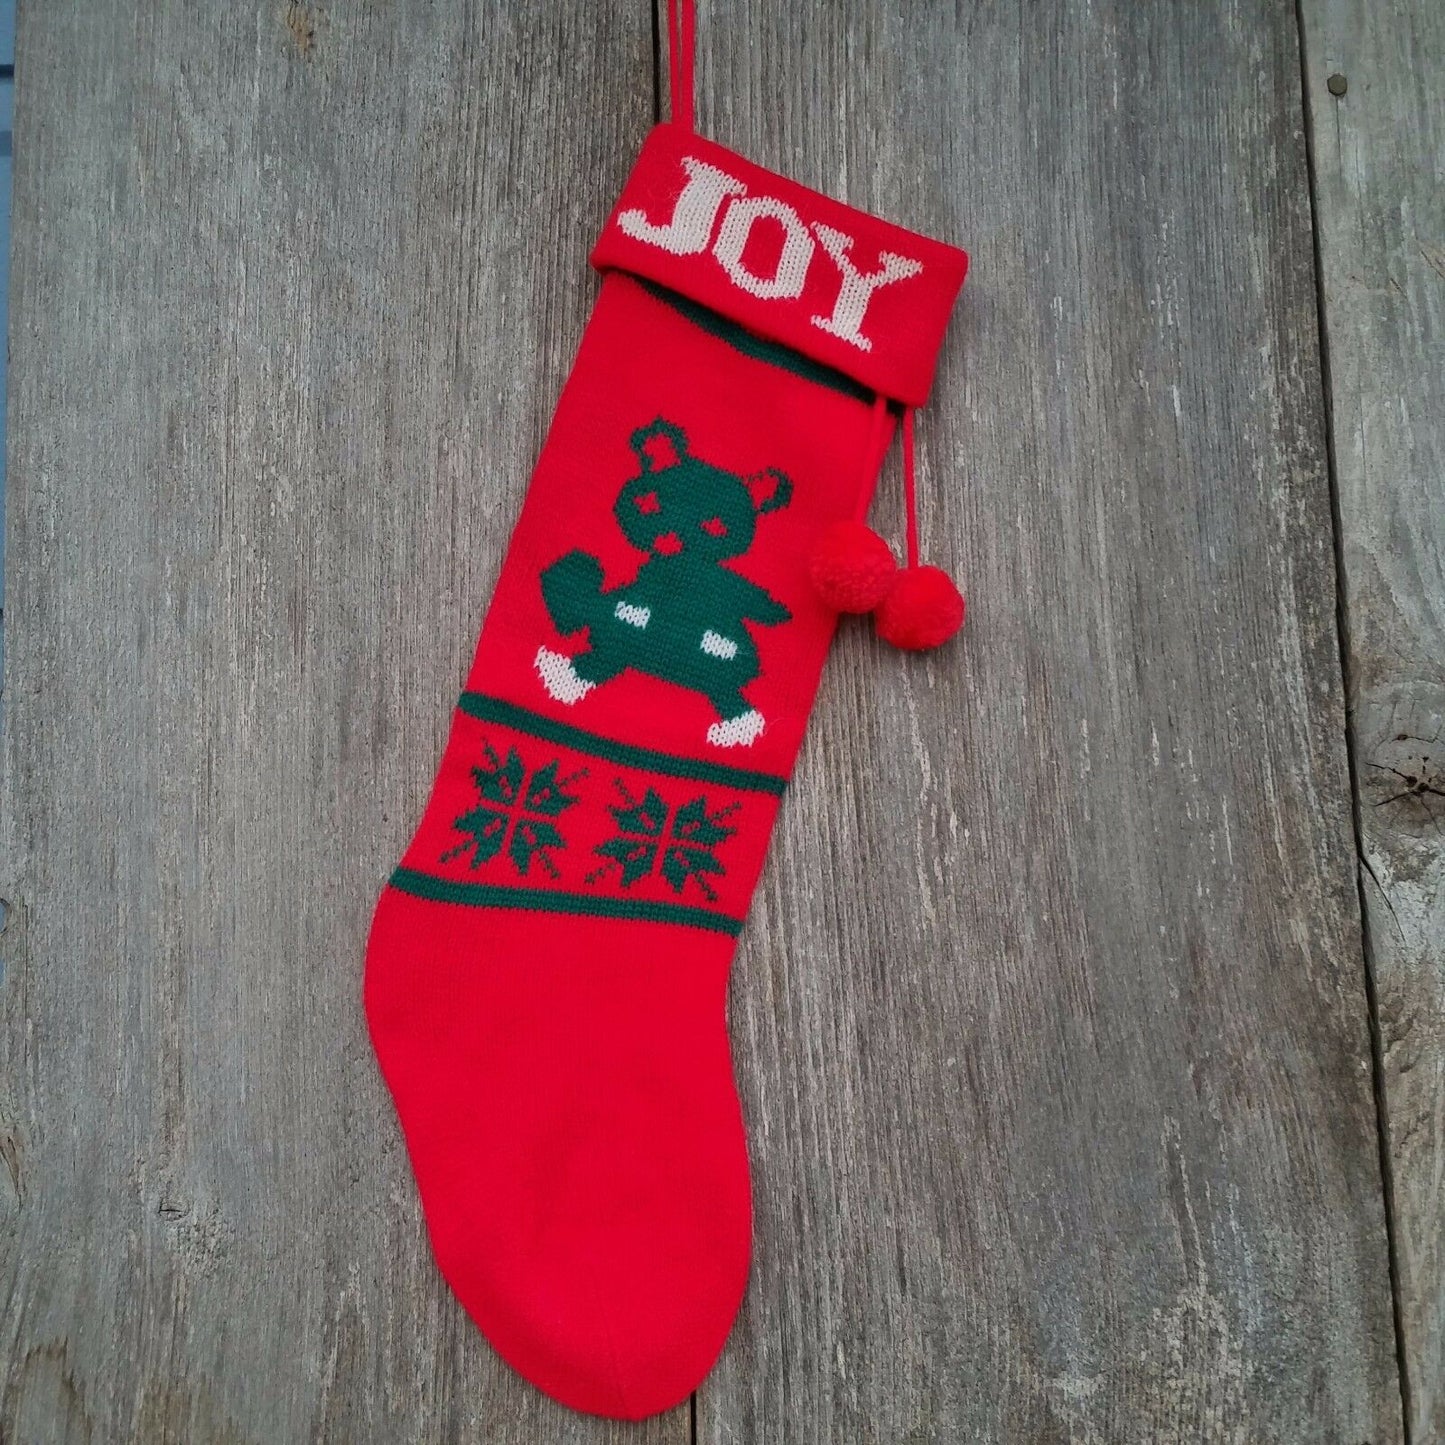 Vintage Teddy Bear Mouse Christmas Stocking Knitted Knit Joy White Red Green - At Grandma's Table